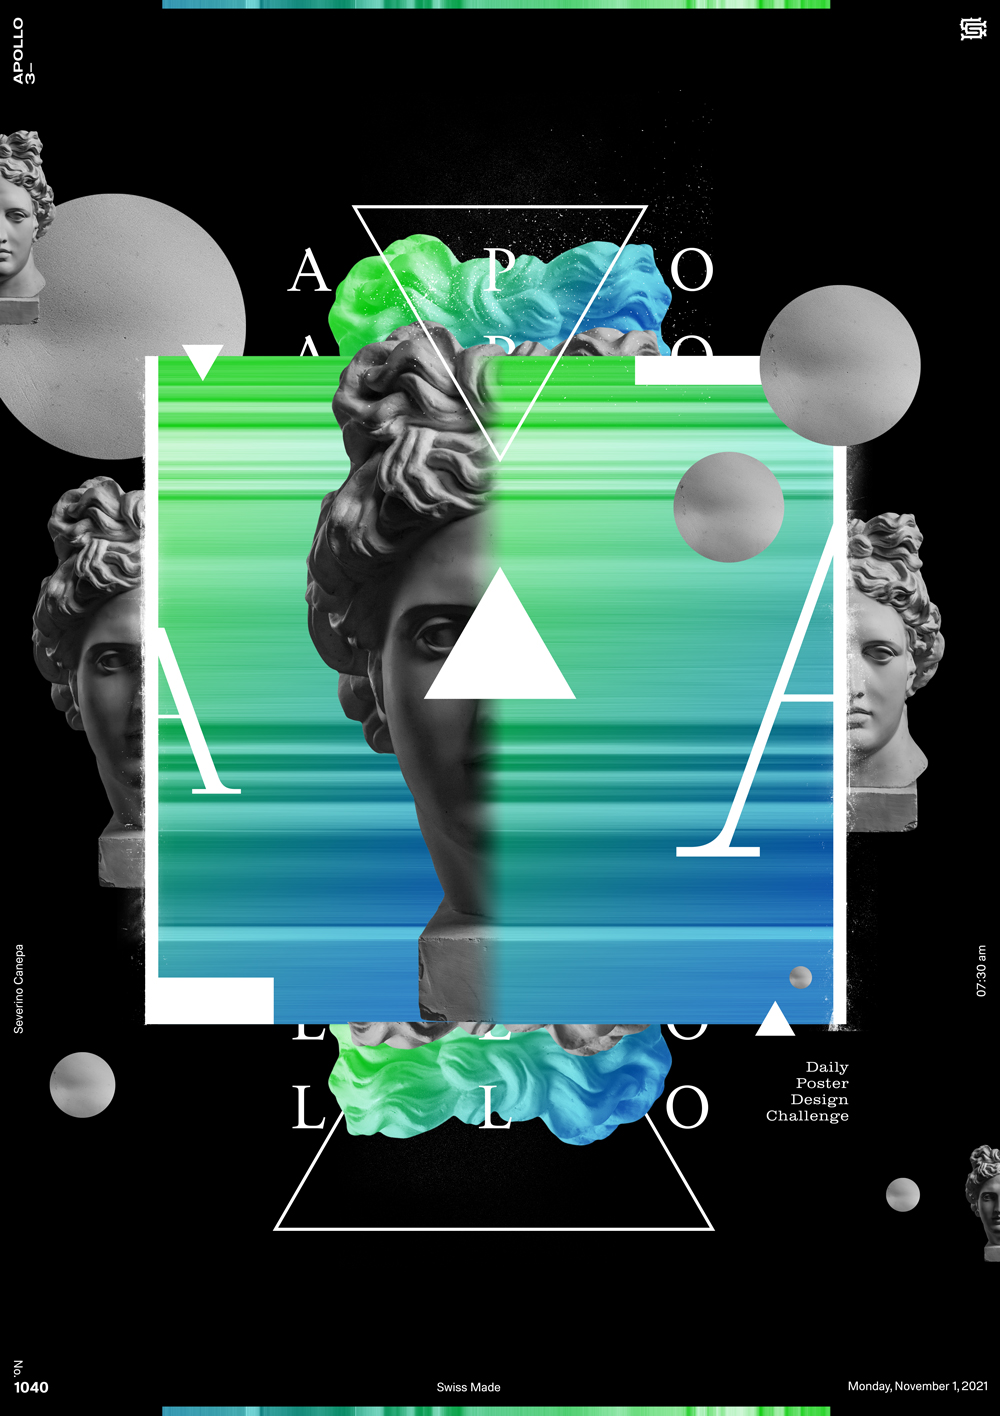 Visual of an aerial design made with the picture of Apollo's Statue and other geometric shapes